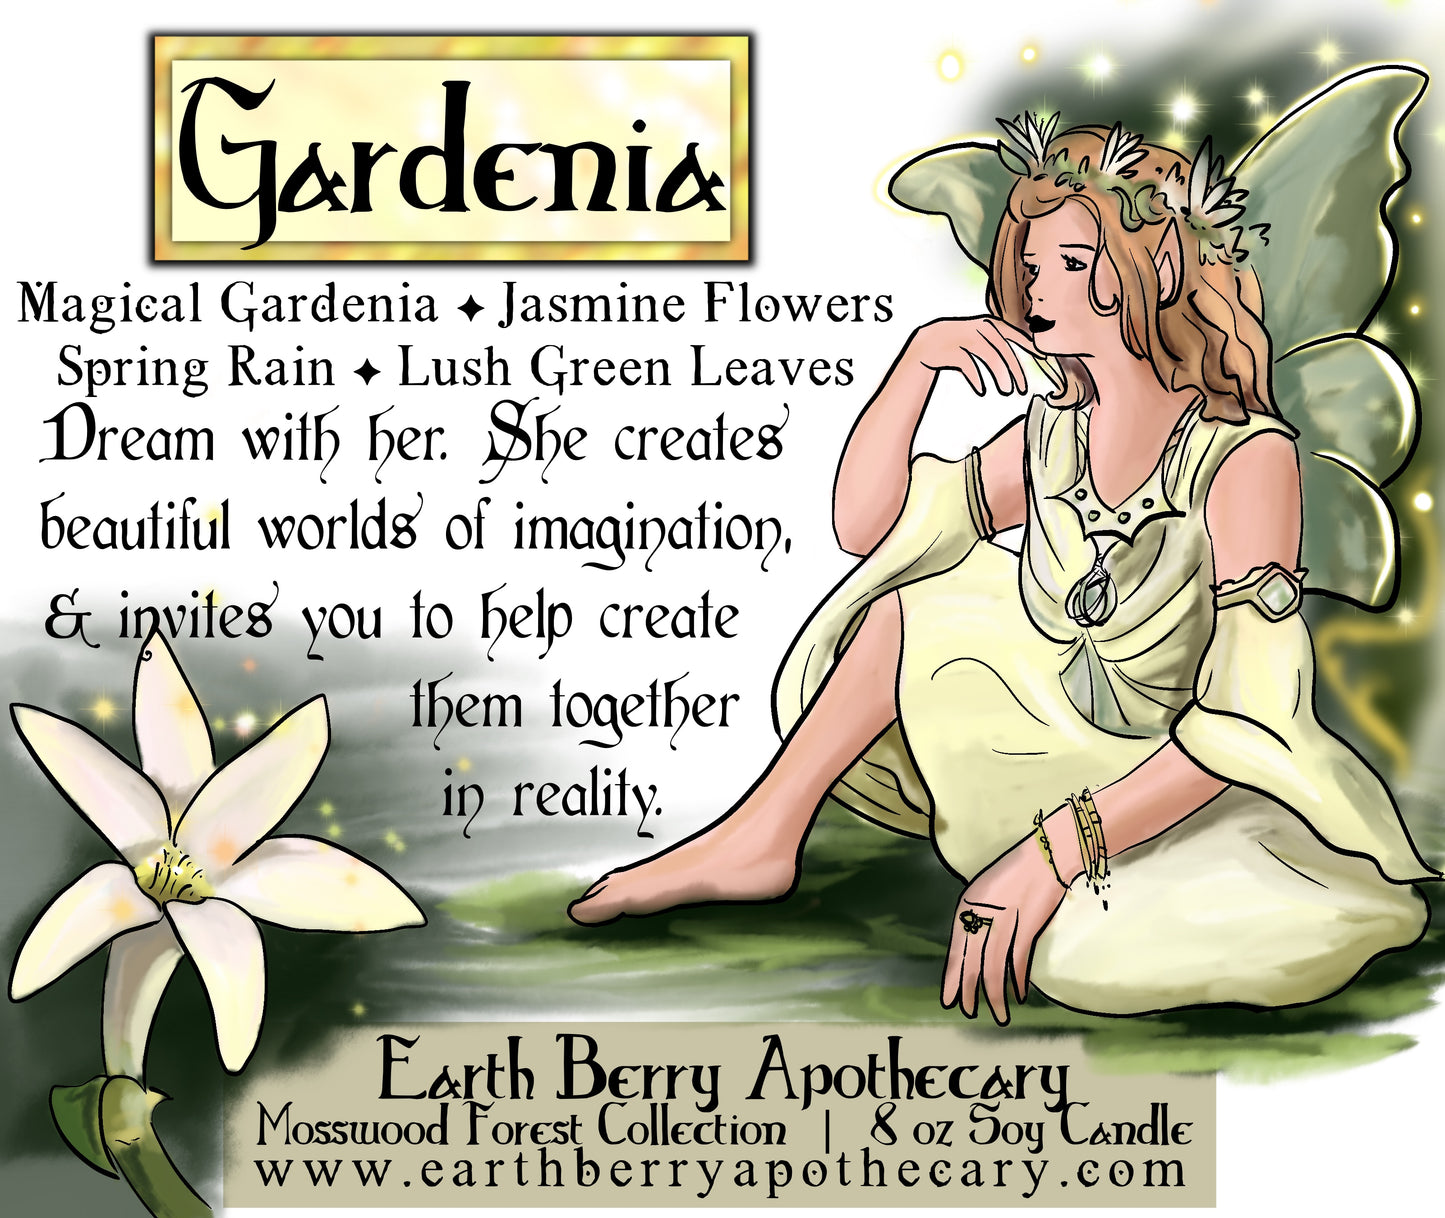 Gardenia scented flower fairy soy candle. The fairy wears a beautiful yellow dress and has flowers in her blonde hair.